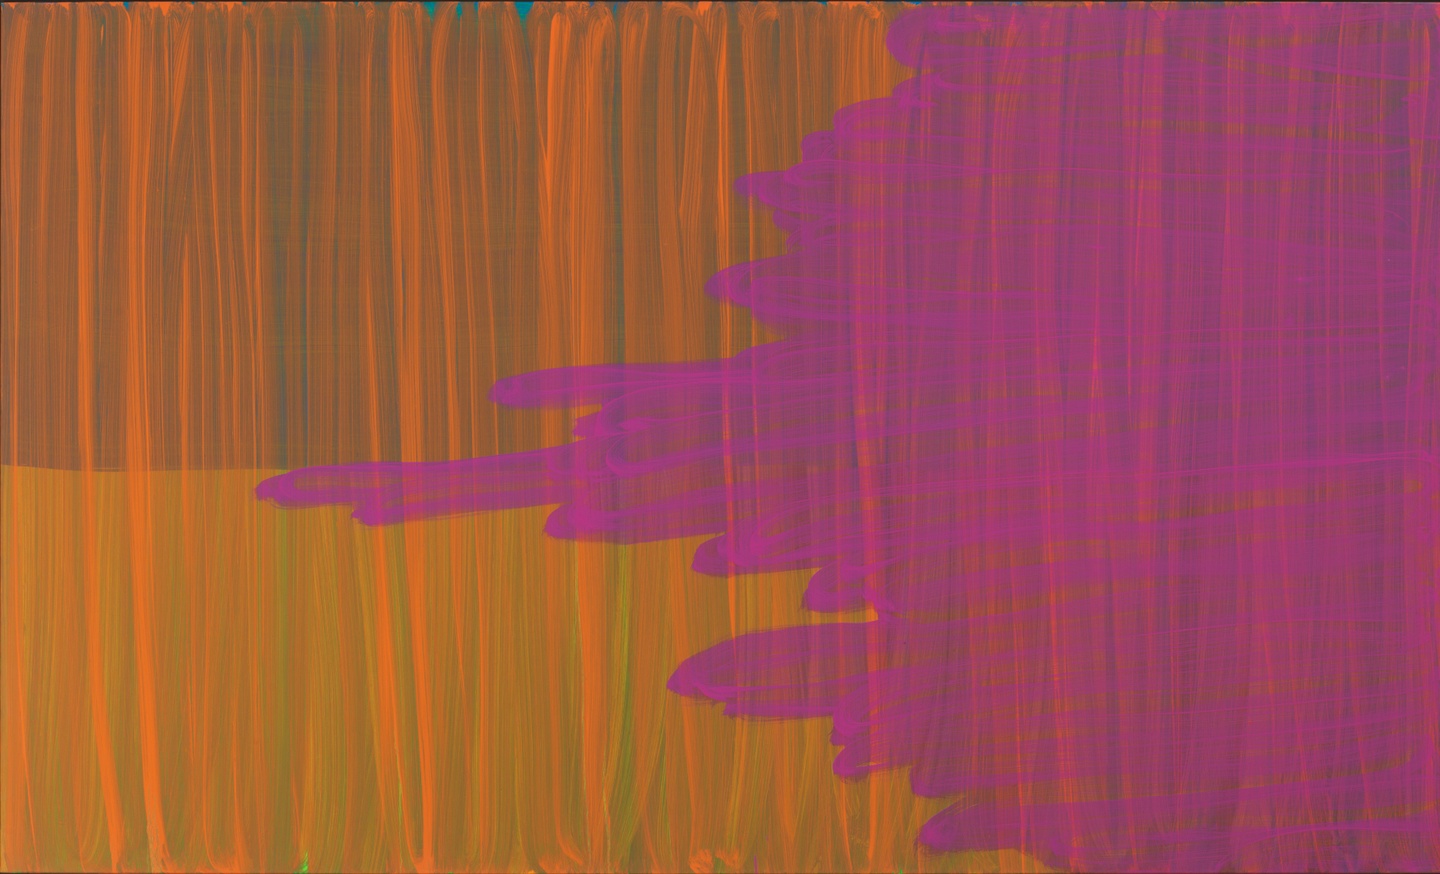 An abstract painting with vertical bands of orange on the left with encroaching swaths of magenta on the right